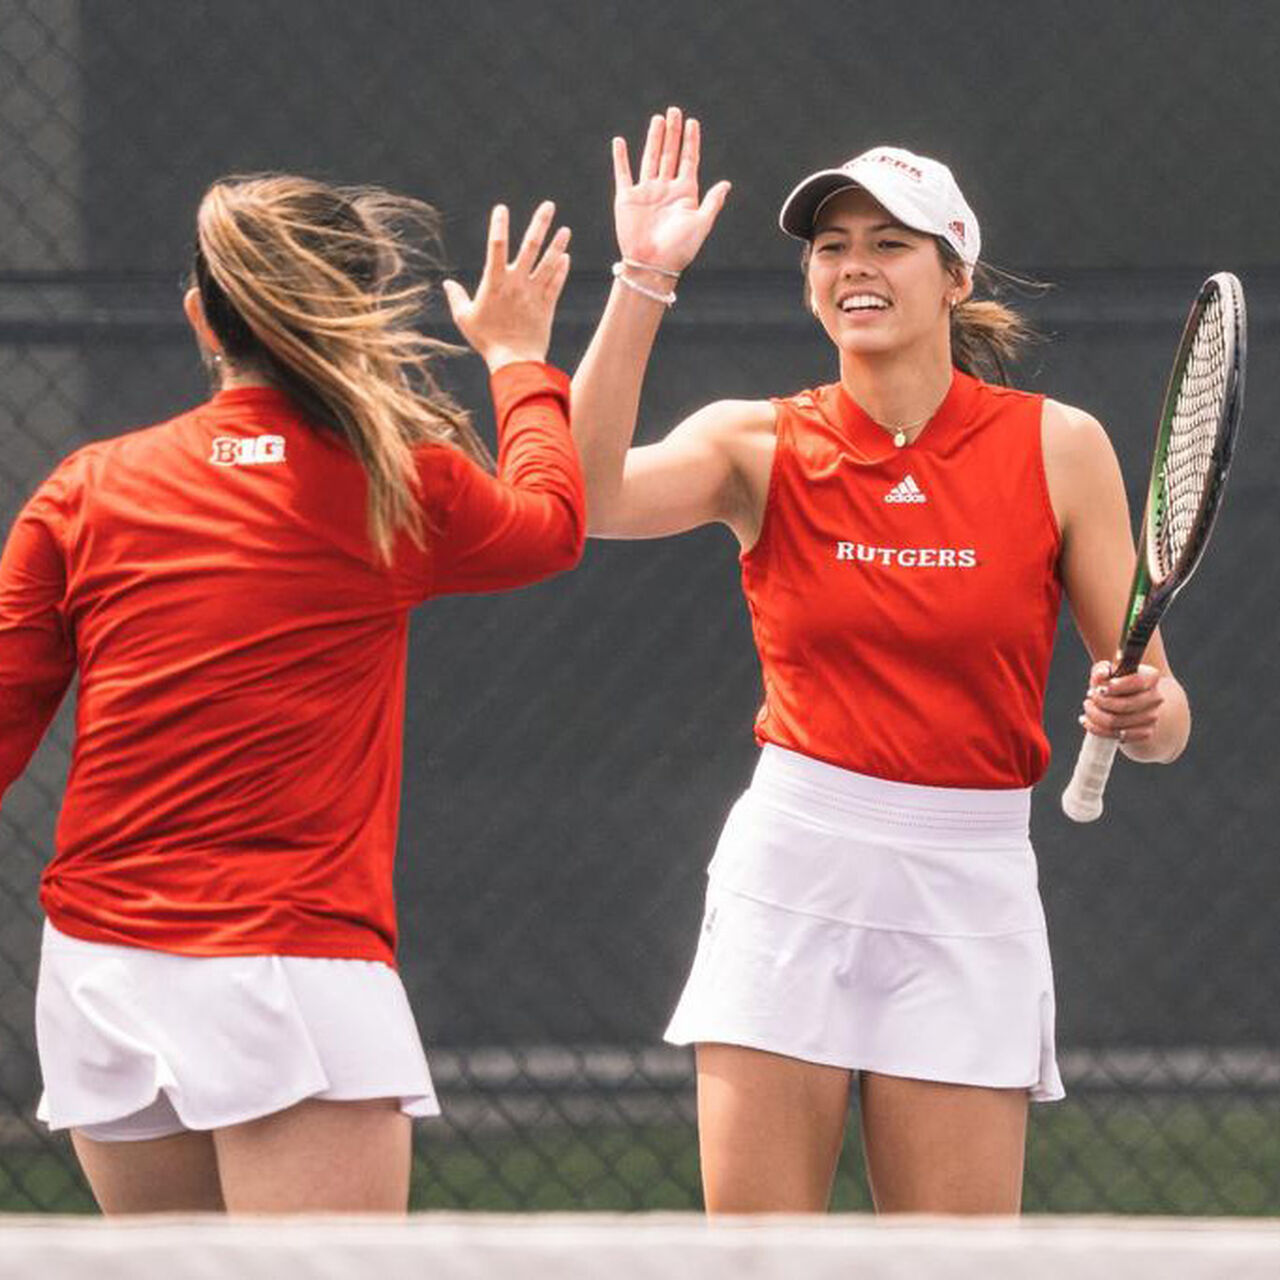 Two Rutgers Women's Tennis players high-fiving one another on the court image number 0